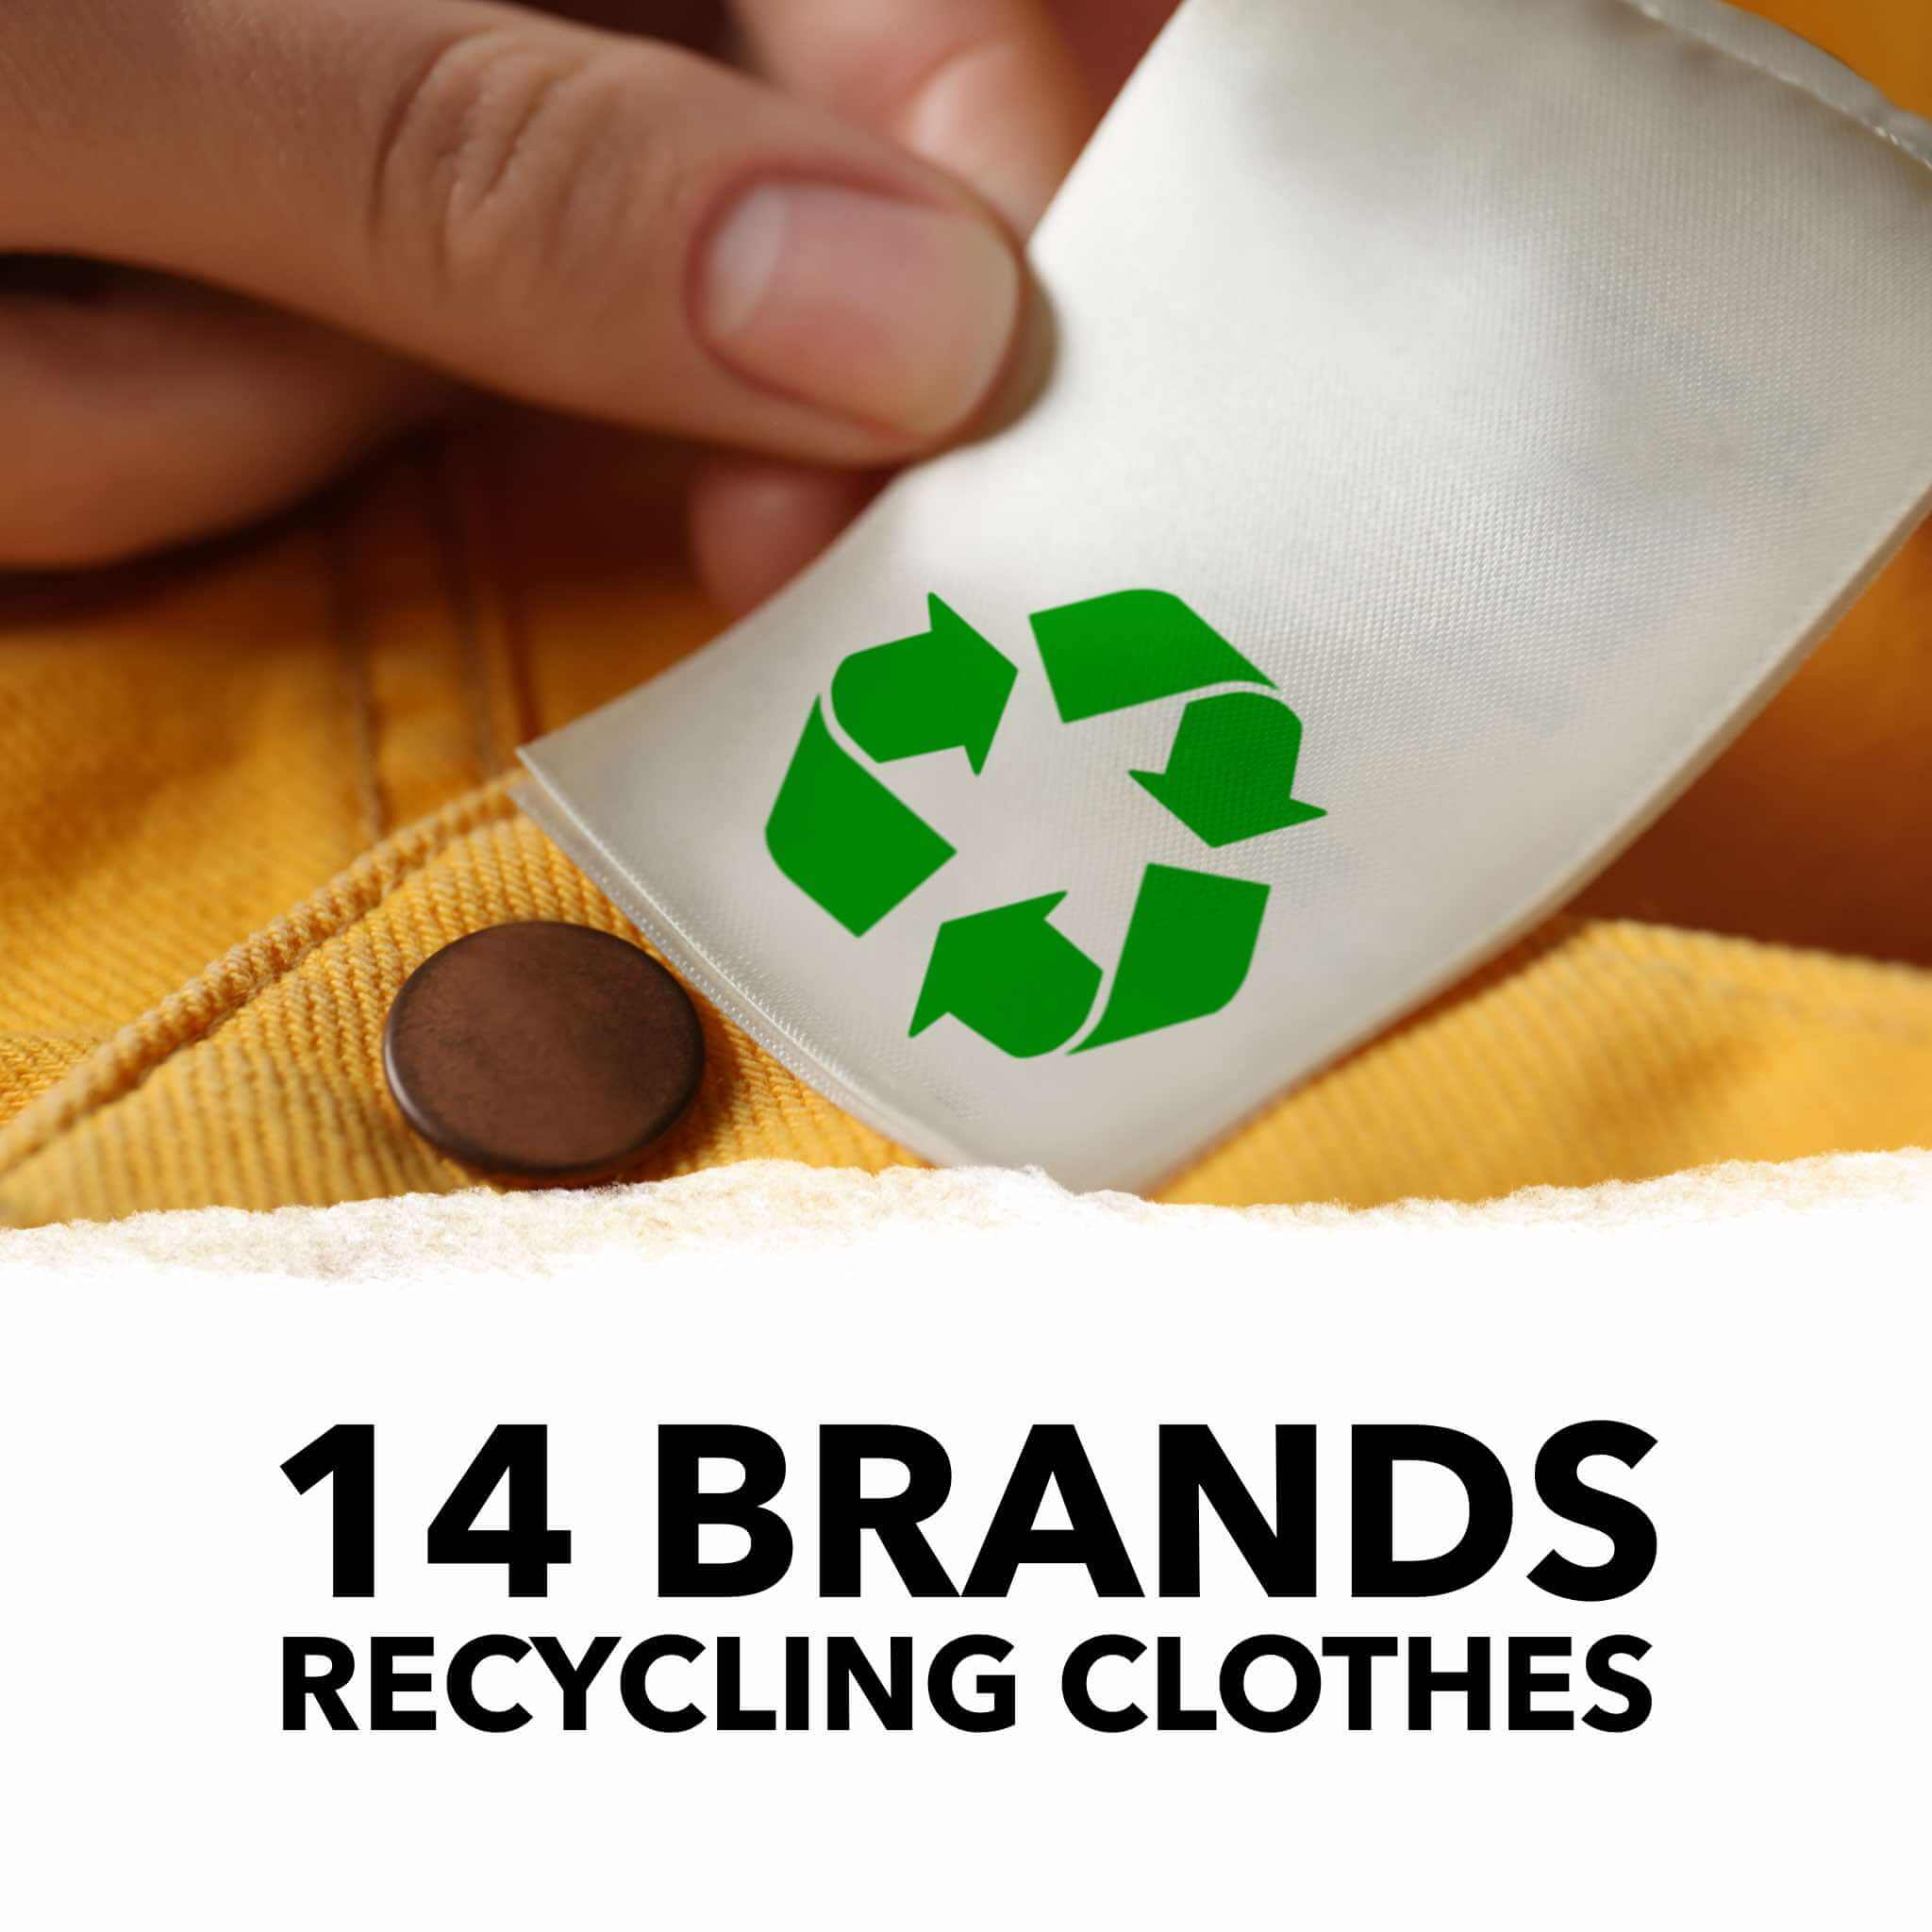 14 brands recycling clothes